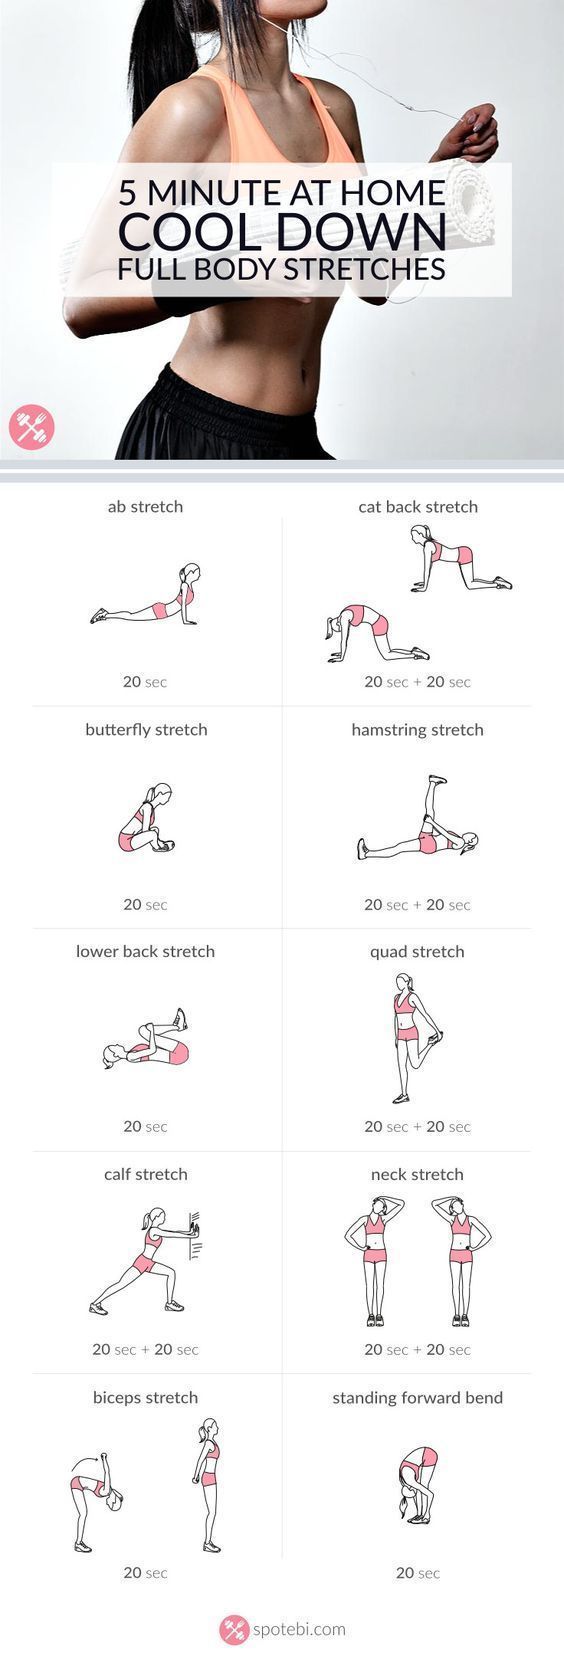 Quick Morning Workout Routines Everybody Can Make Time For -   10 fitness Routine gym ideas